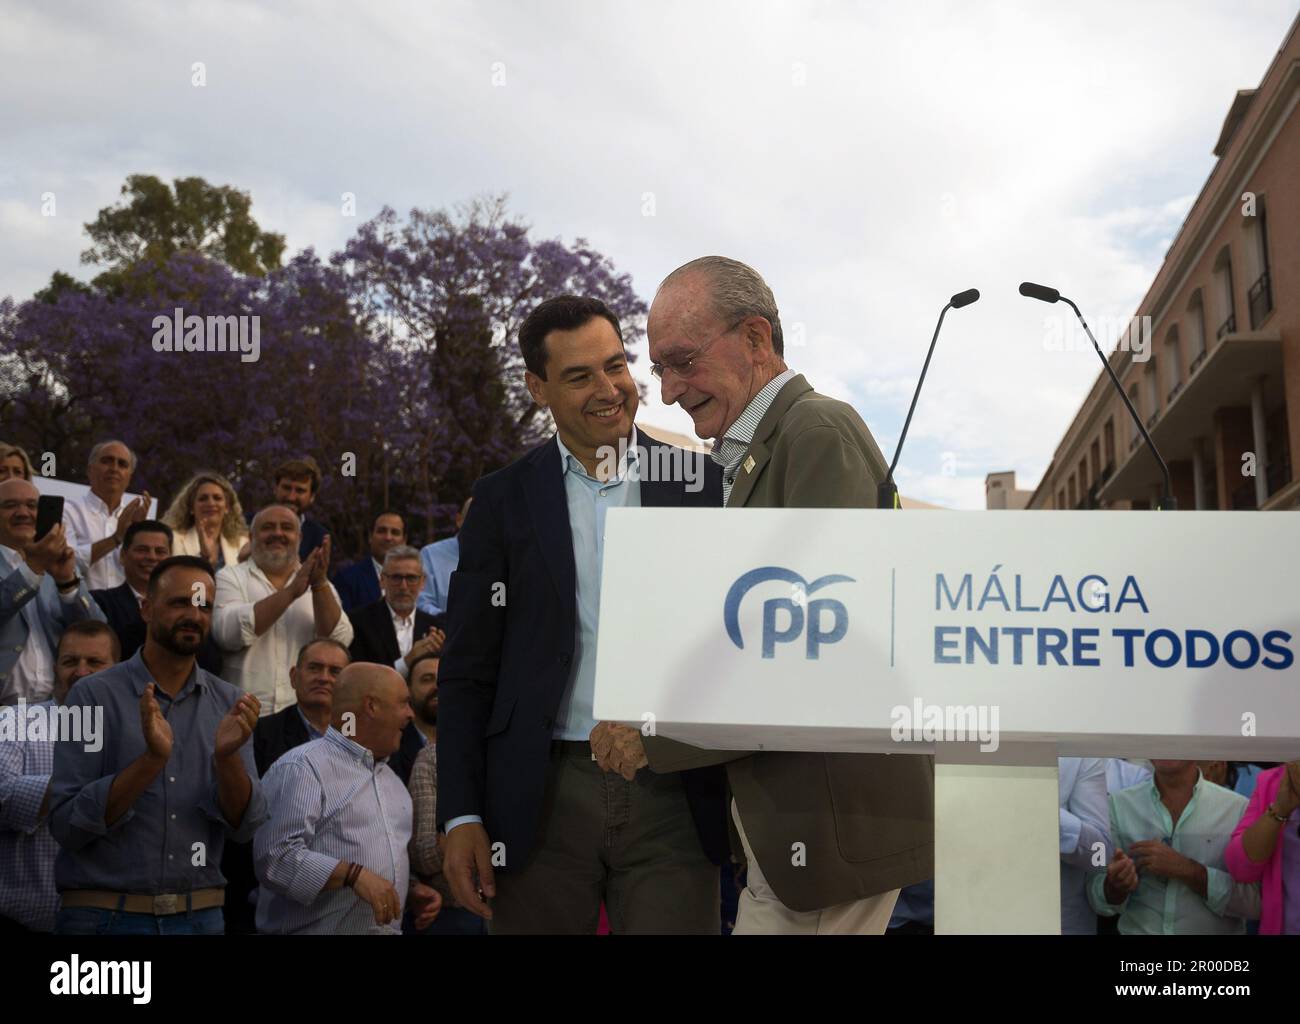 Andalusian regional president Juanma Moreno (L) is seen chatting with popular candidate for municipal elections and current Malaga mayor Francisco de la Torre (R), as they take part during an electoral pre-campaign event. The president of the Spanish Popular Party, Alberto Nunez Feijoo, has begun a tour of pre-election events in several cities across the country to support the Popular Party's candidates for the upcoming municipal elections. The results of the municipal elections on May 28th could influence the vote in the Spanish general elections at the end of the year. Stock Photo